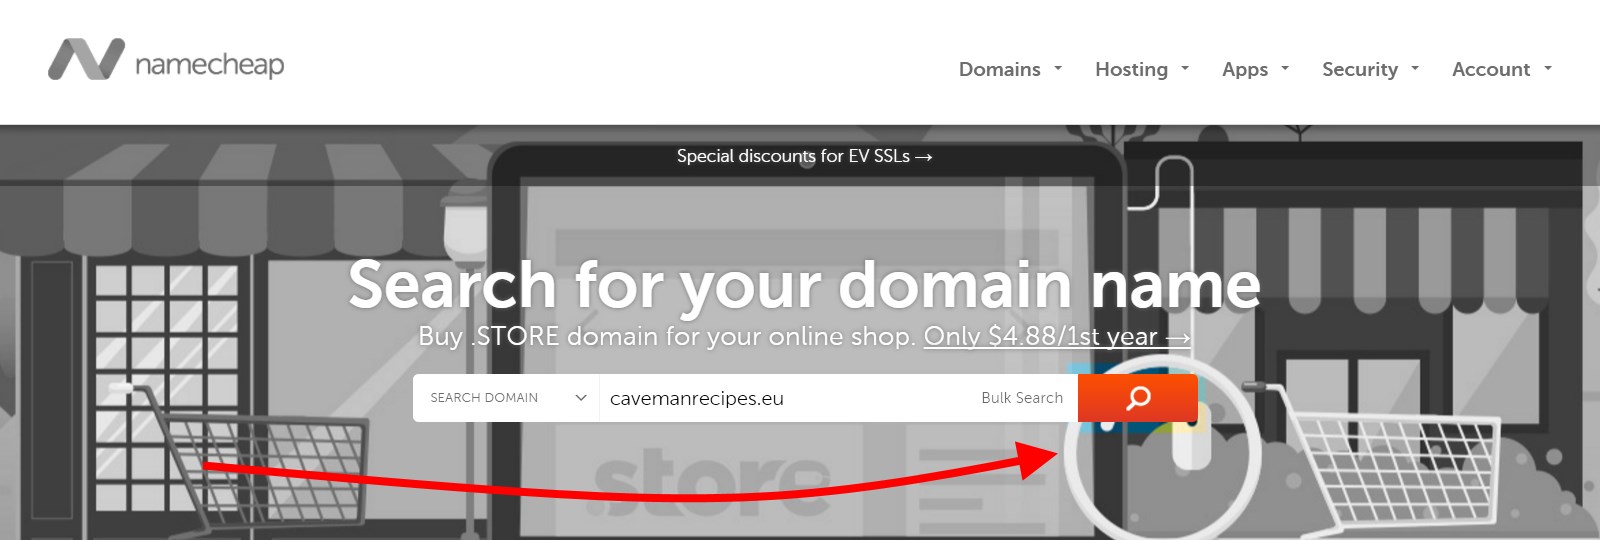 Search For Your Domain Name - Namecheap